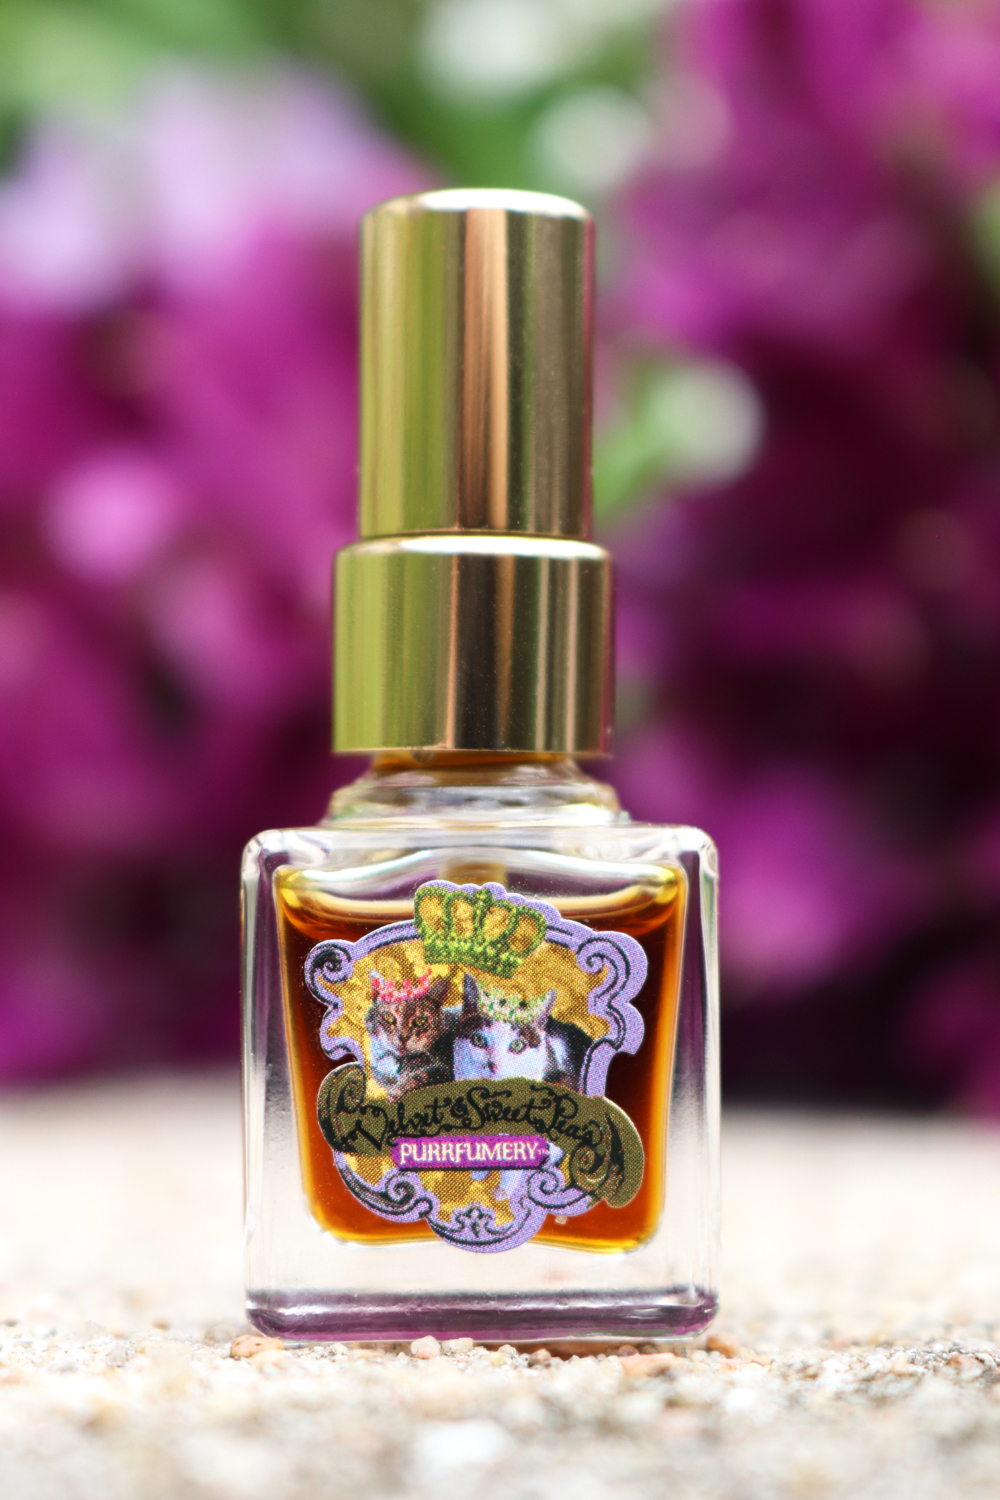 Pangolin Violette Rose cruelty free perfume by Velvet and Sweet Pea's Purrfumery